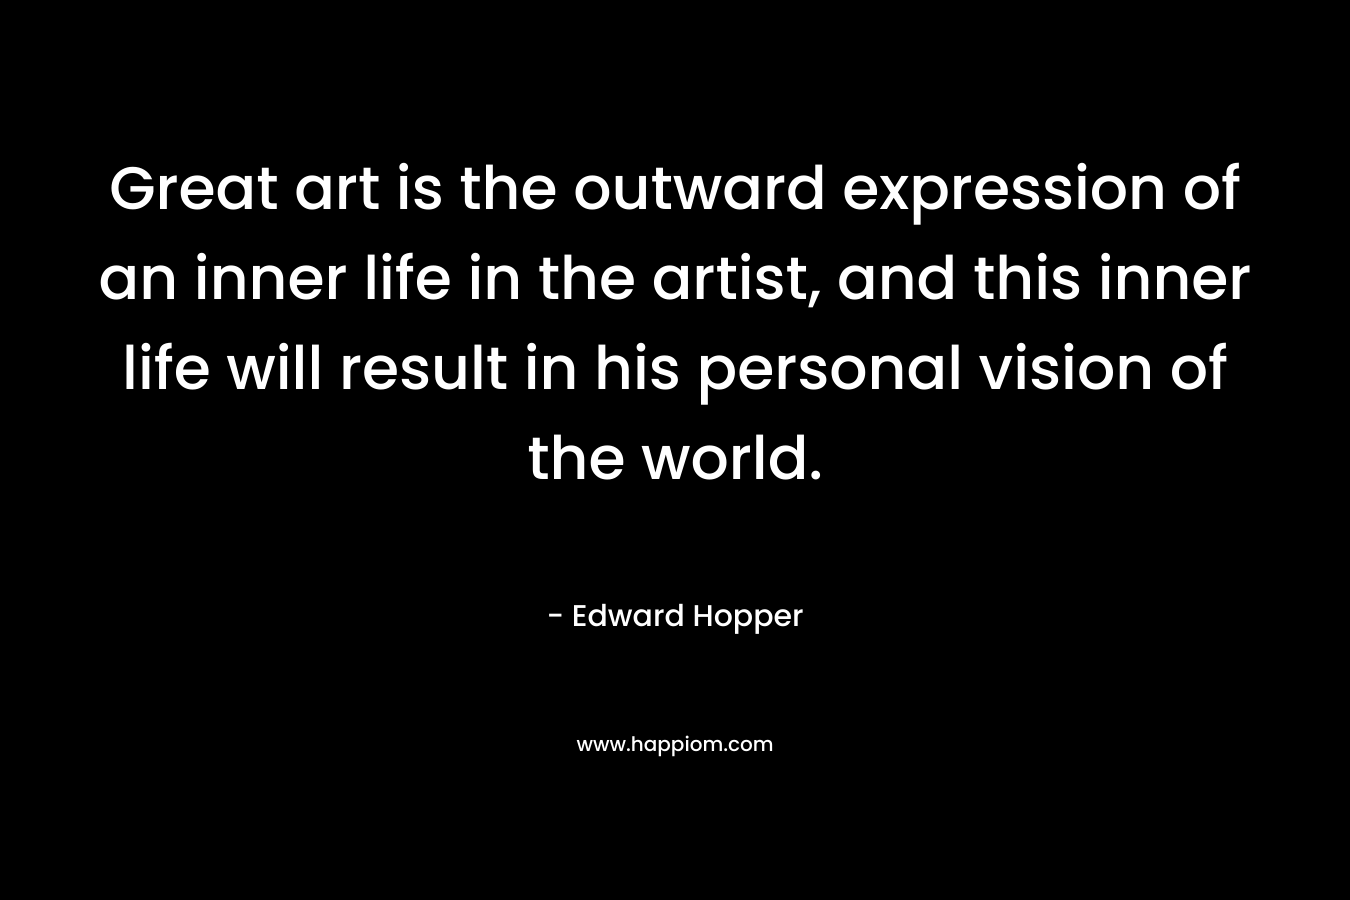 Great art is the outward expression of an inner life in the artist, and this inner life will result in his personal vision of the world.